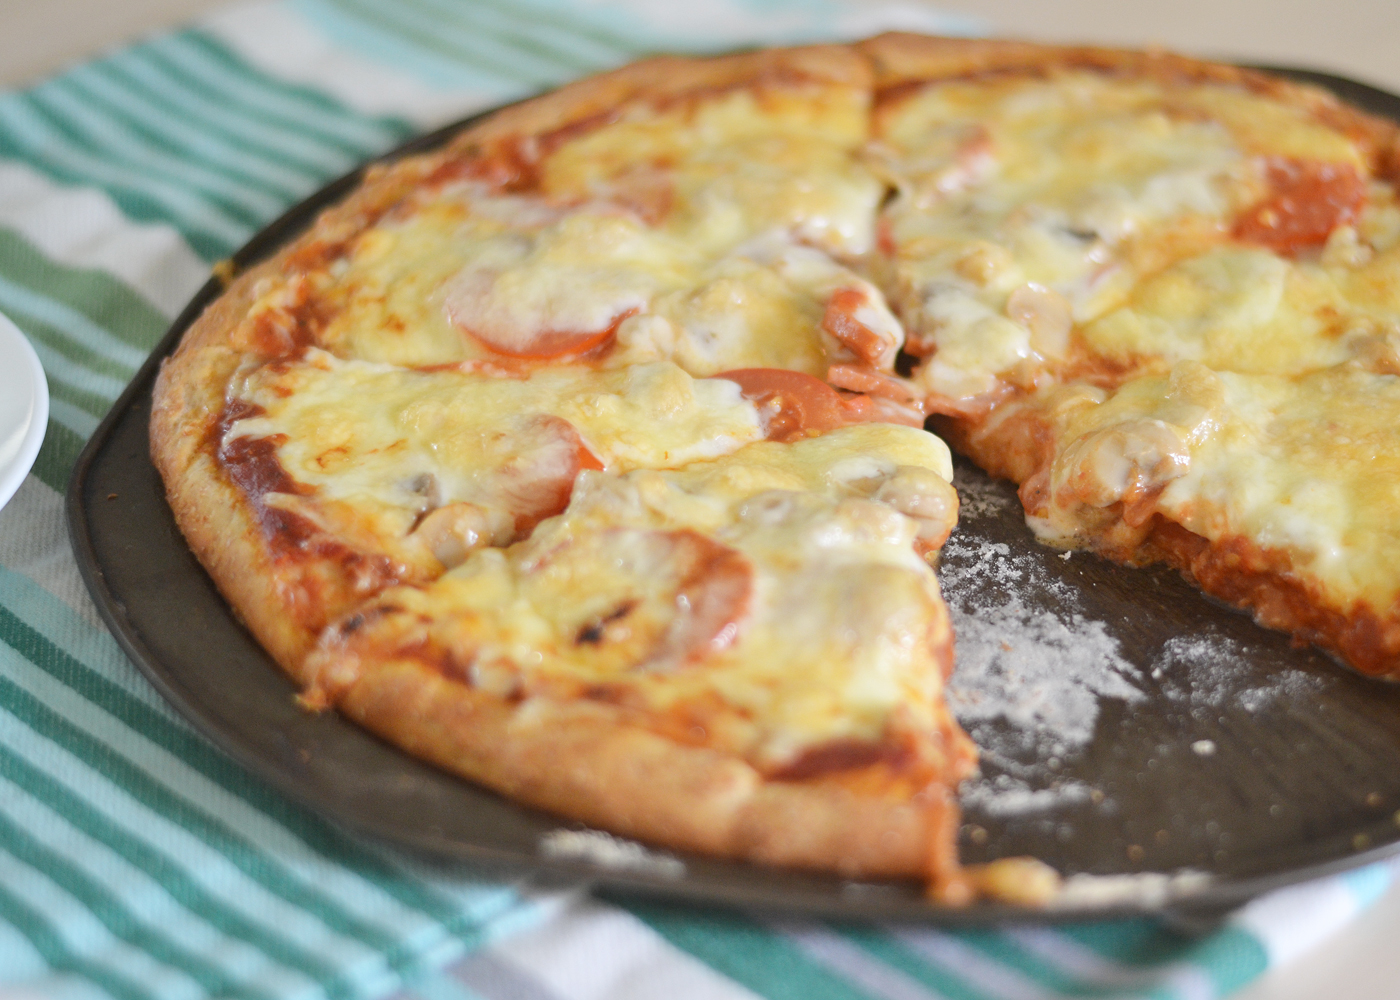 How to Make Whole Wheat Pizza (Video)